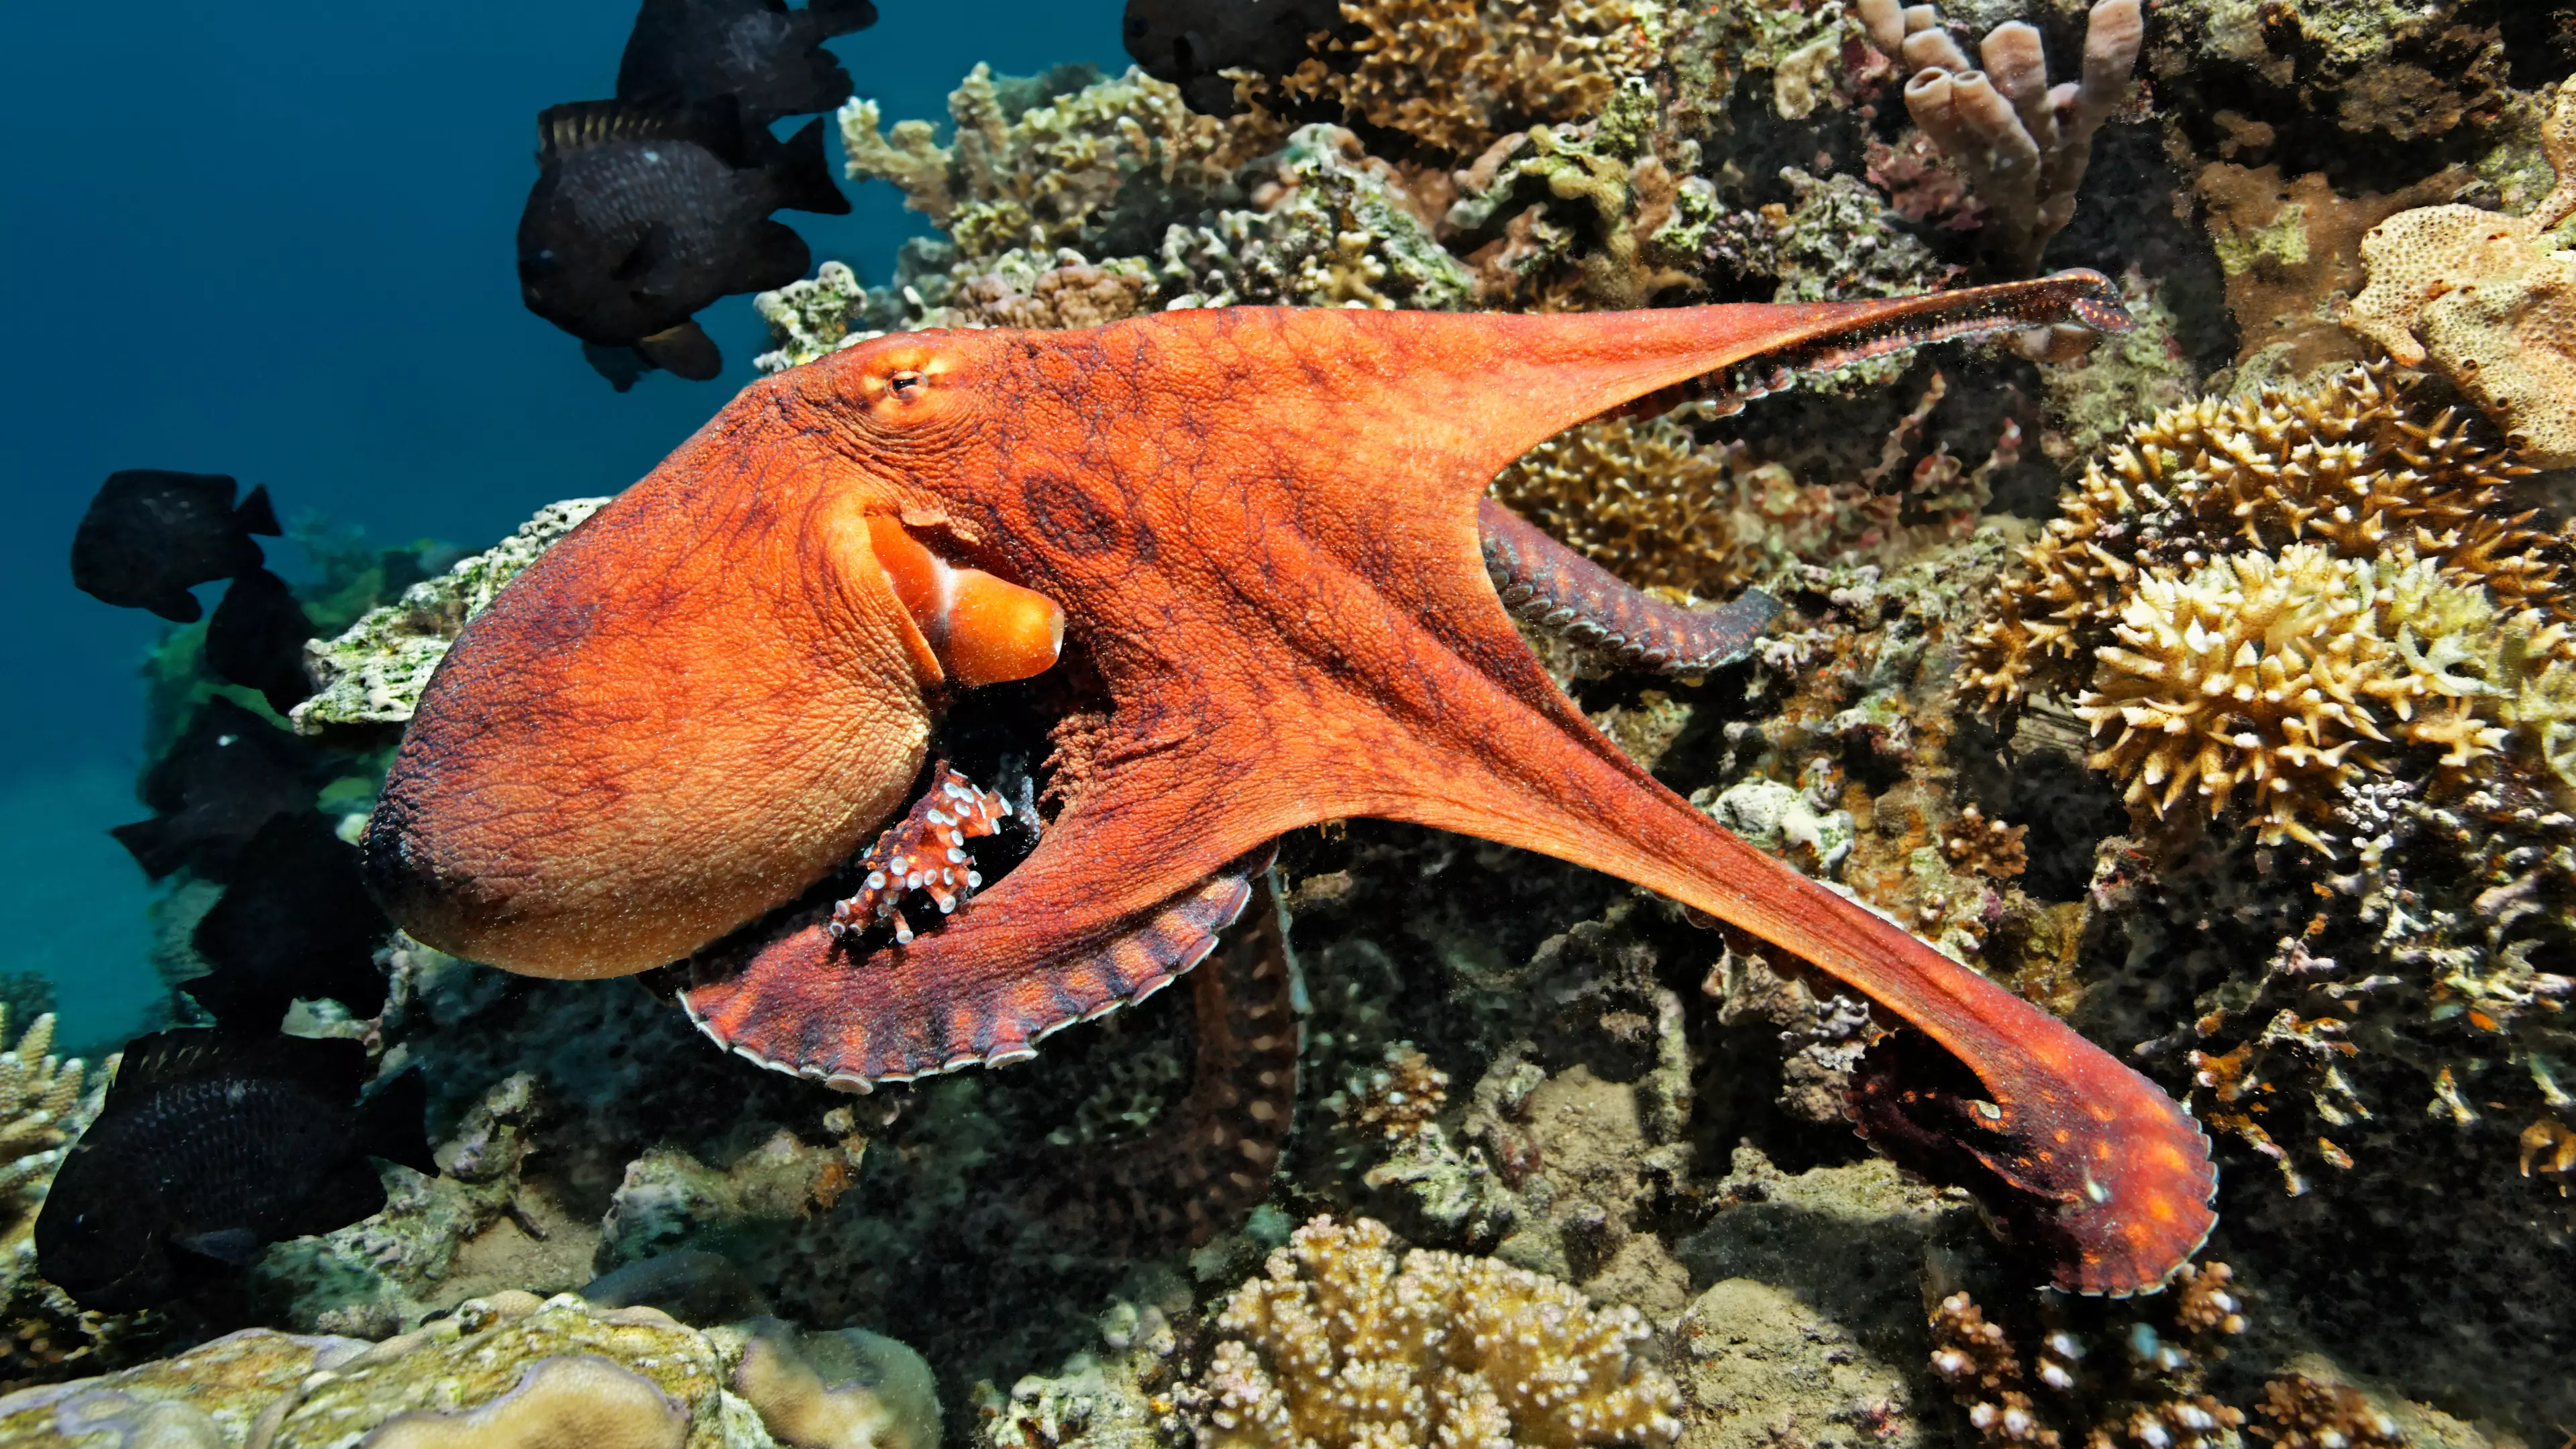 Experts Call For The World’s First Commercial Octopus Farm To Be Shut Down